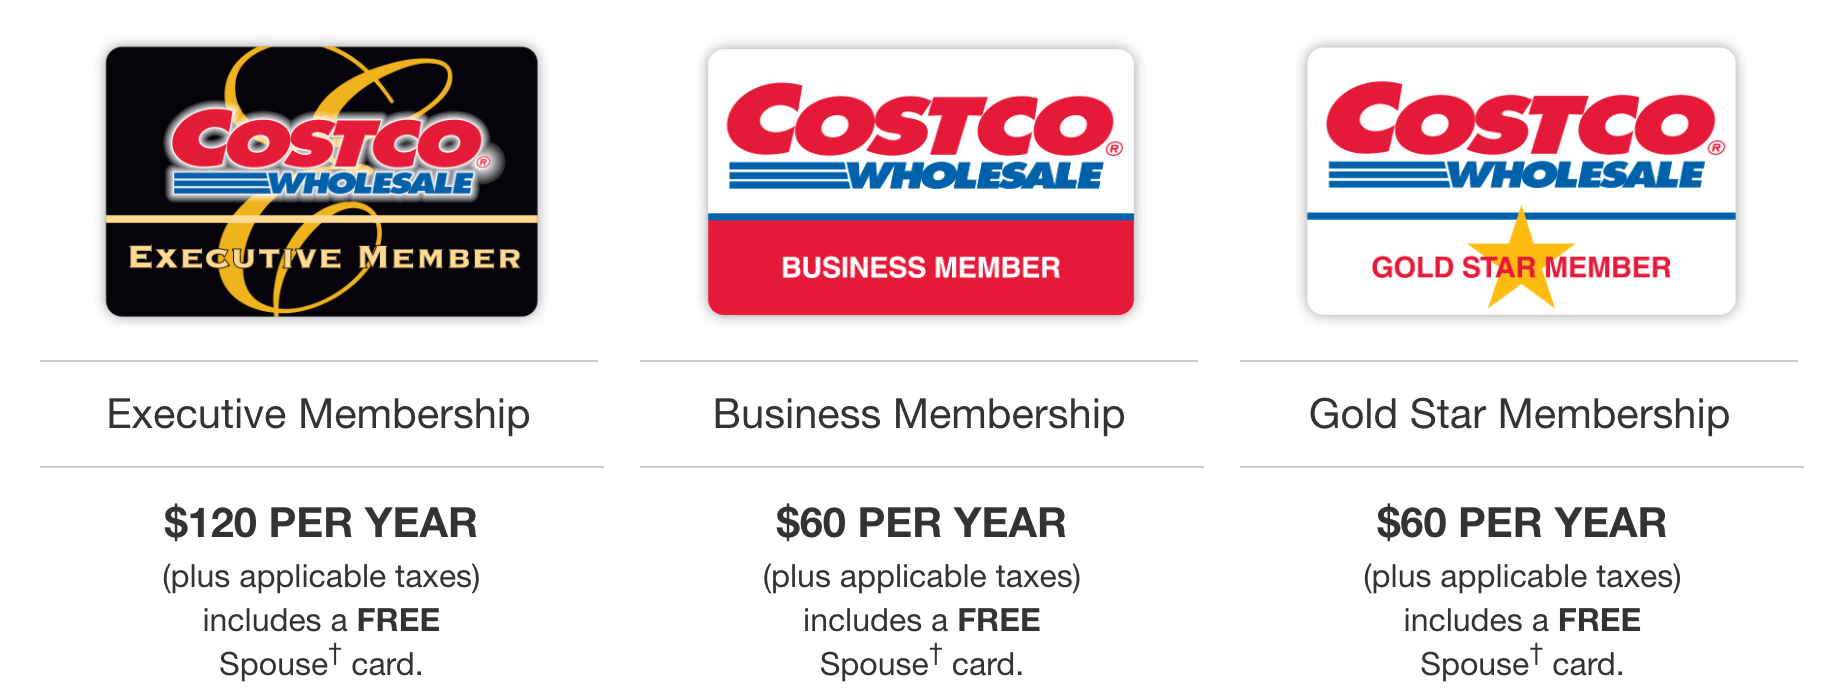 Costco Canada Deal Free 20 Gift Voucher with Any New Membership! Canadian Freebies, Coupons